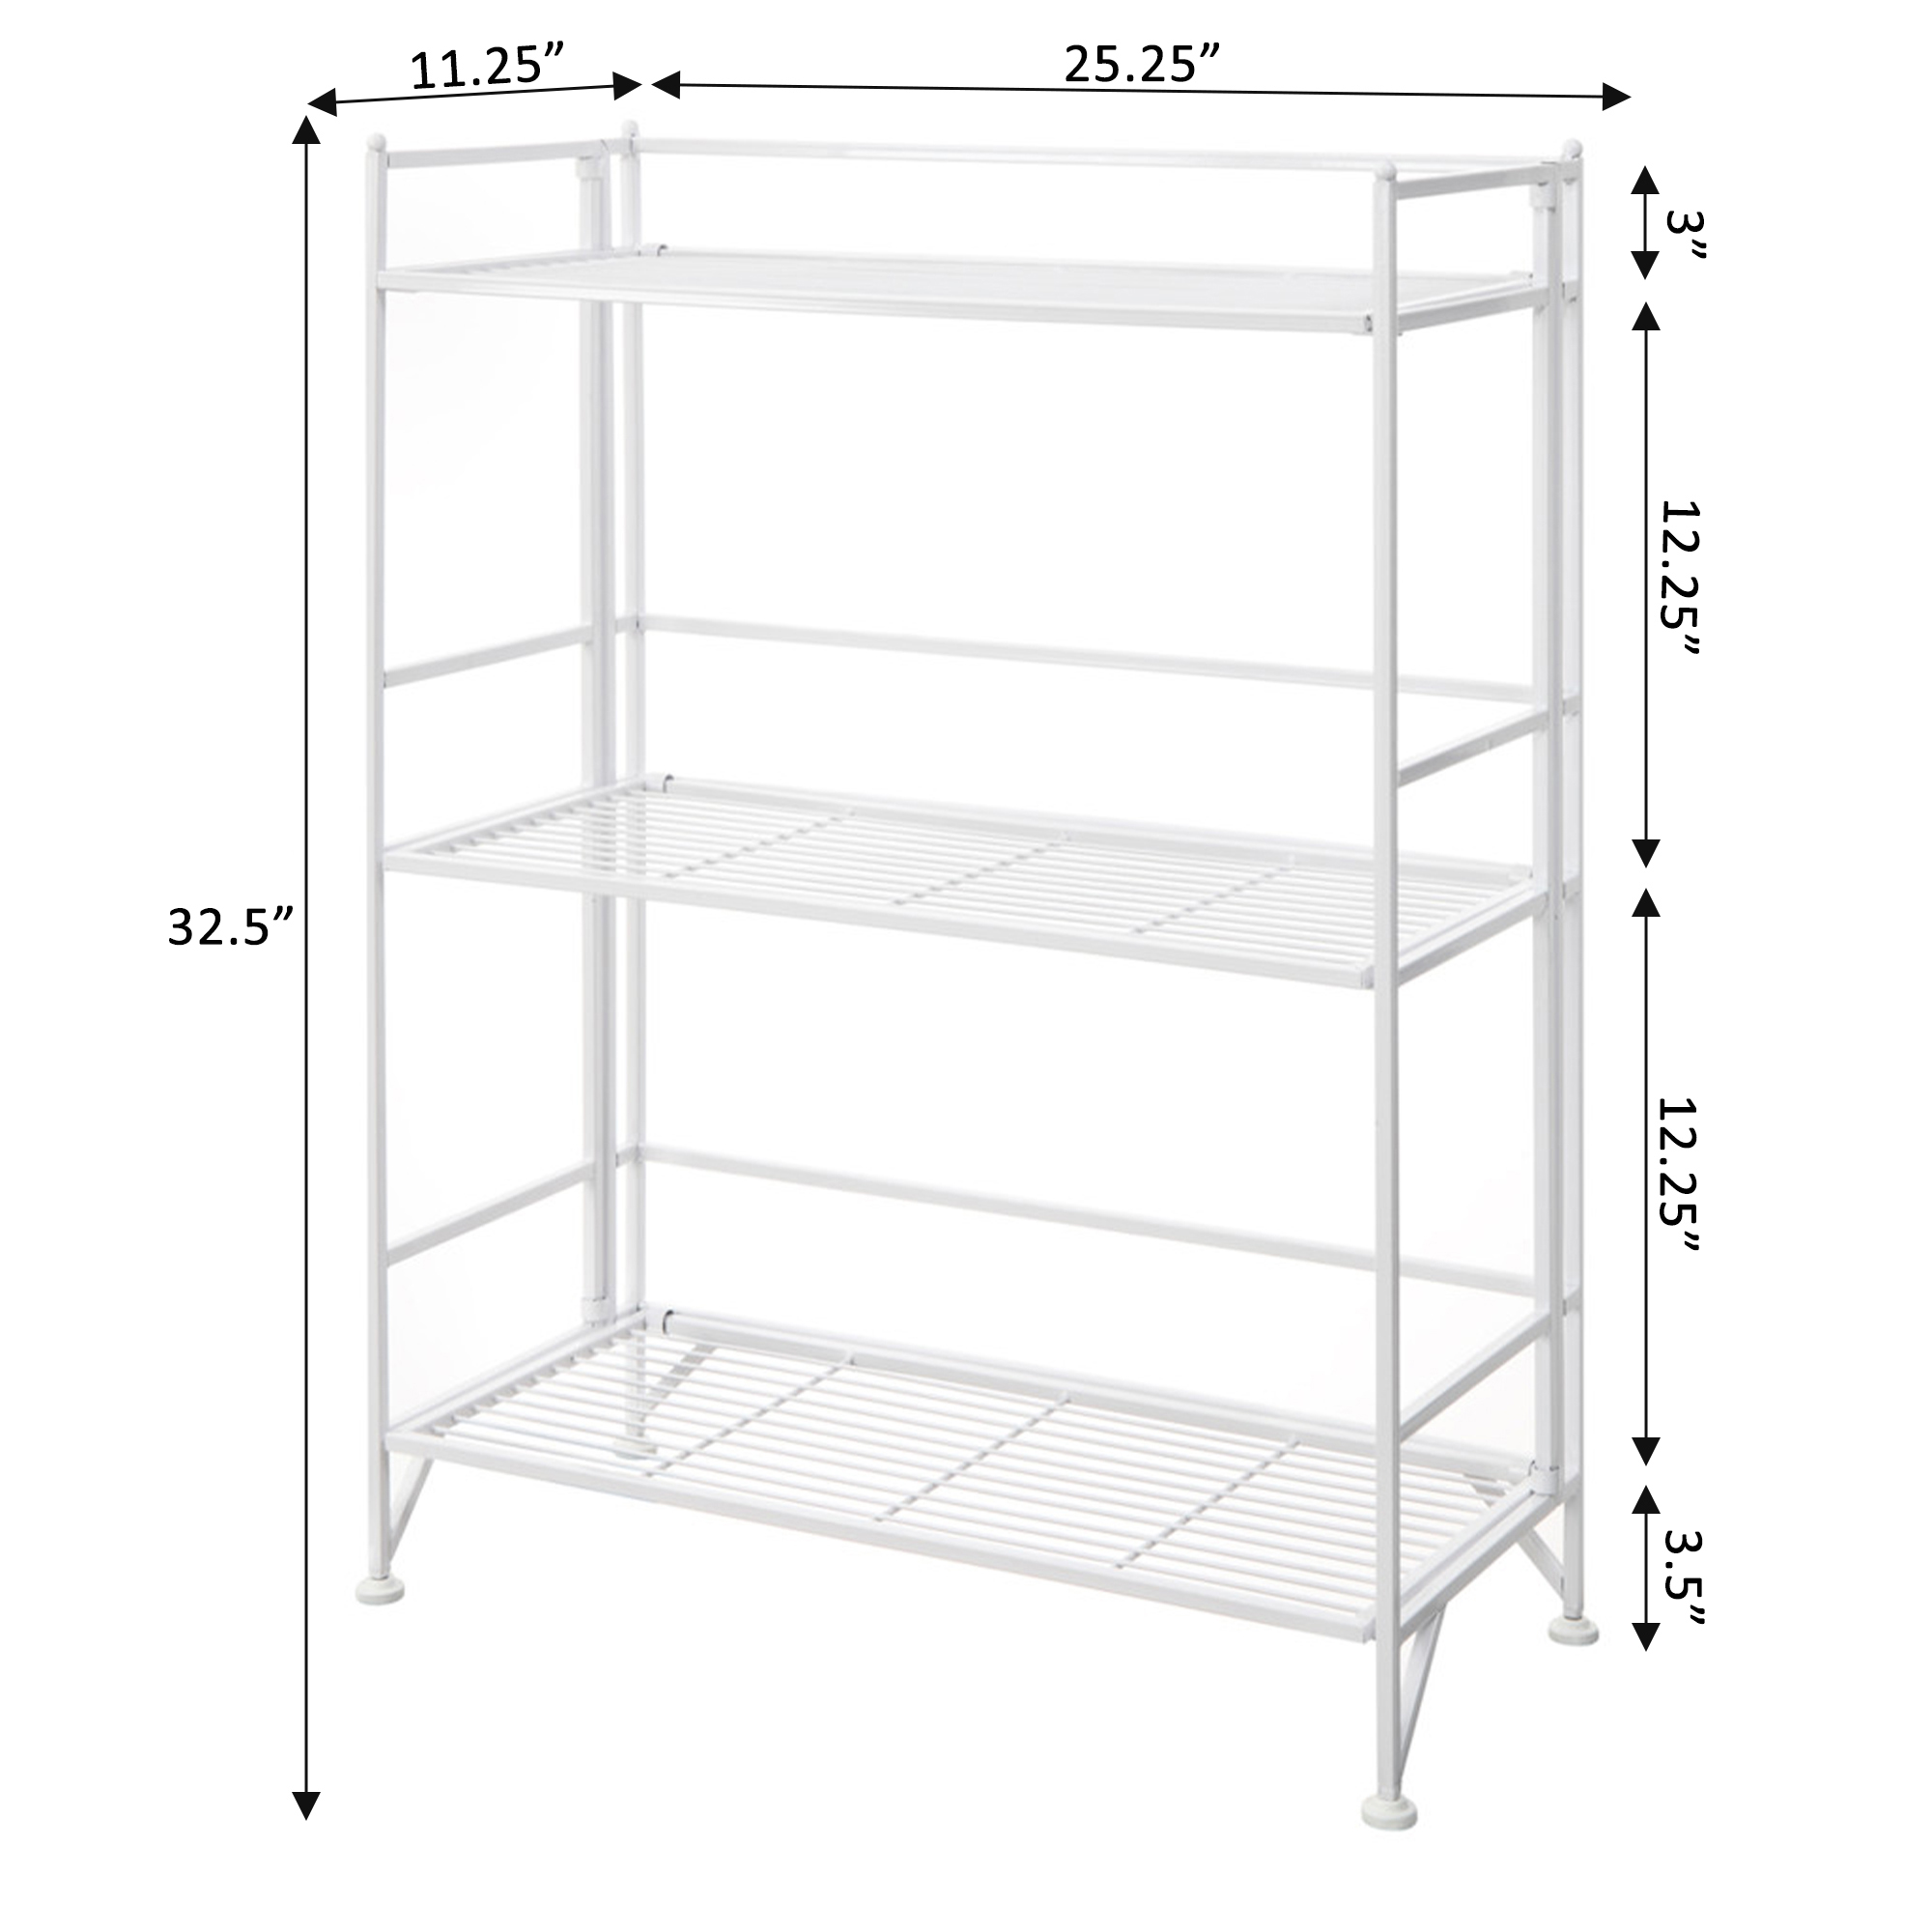 Convenience Concepts Xtra Storage 3 Tier Wide Folding Metal Shelf, White - image 5 of 7